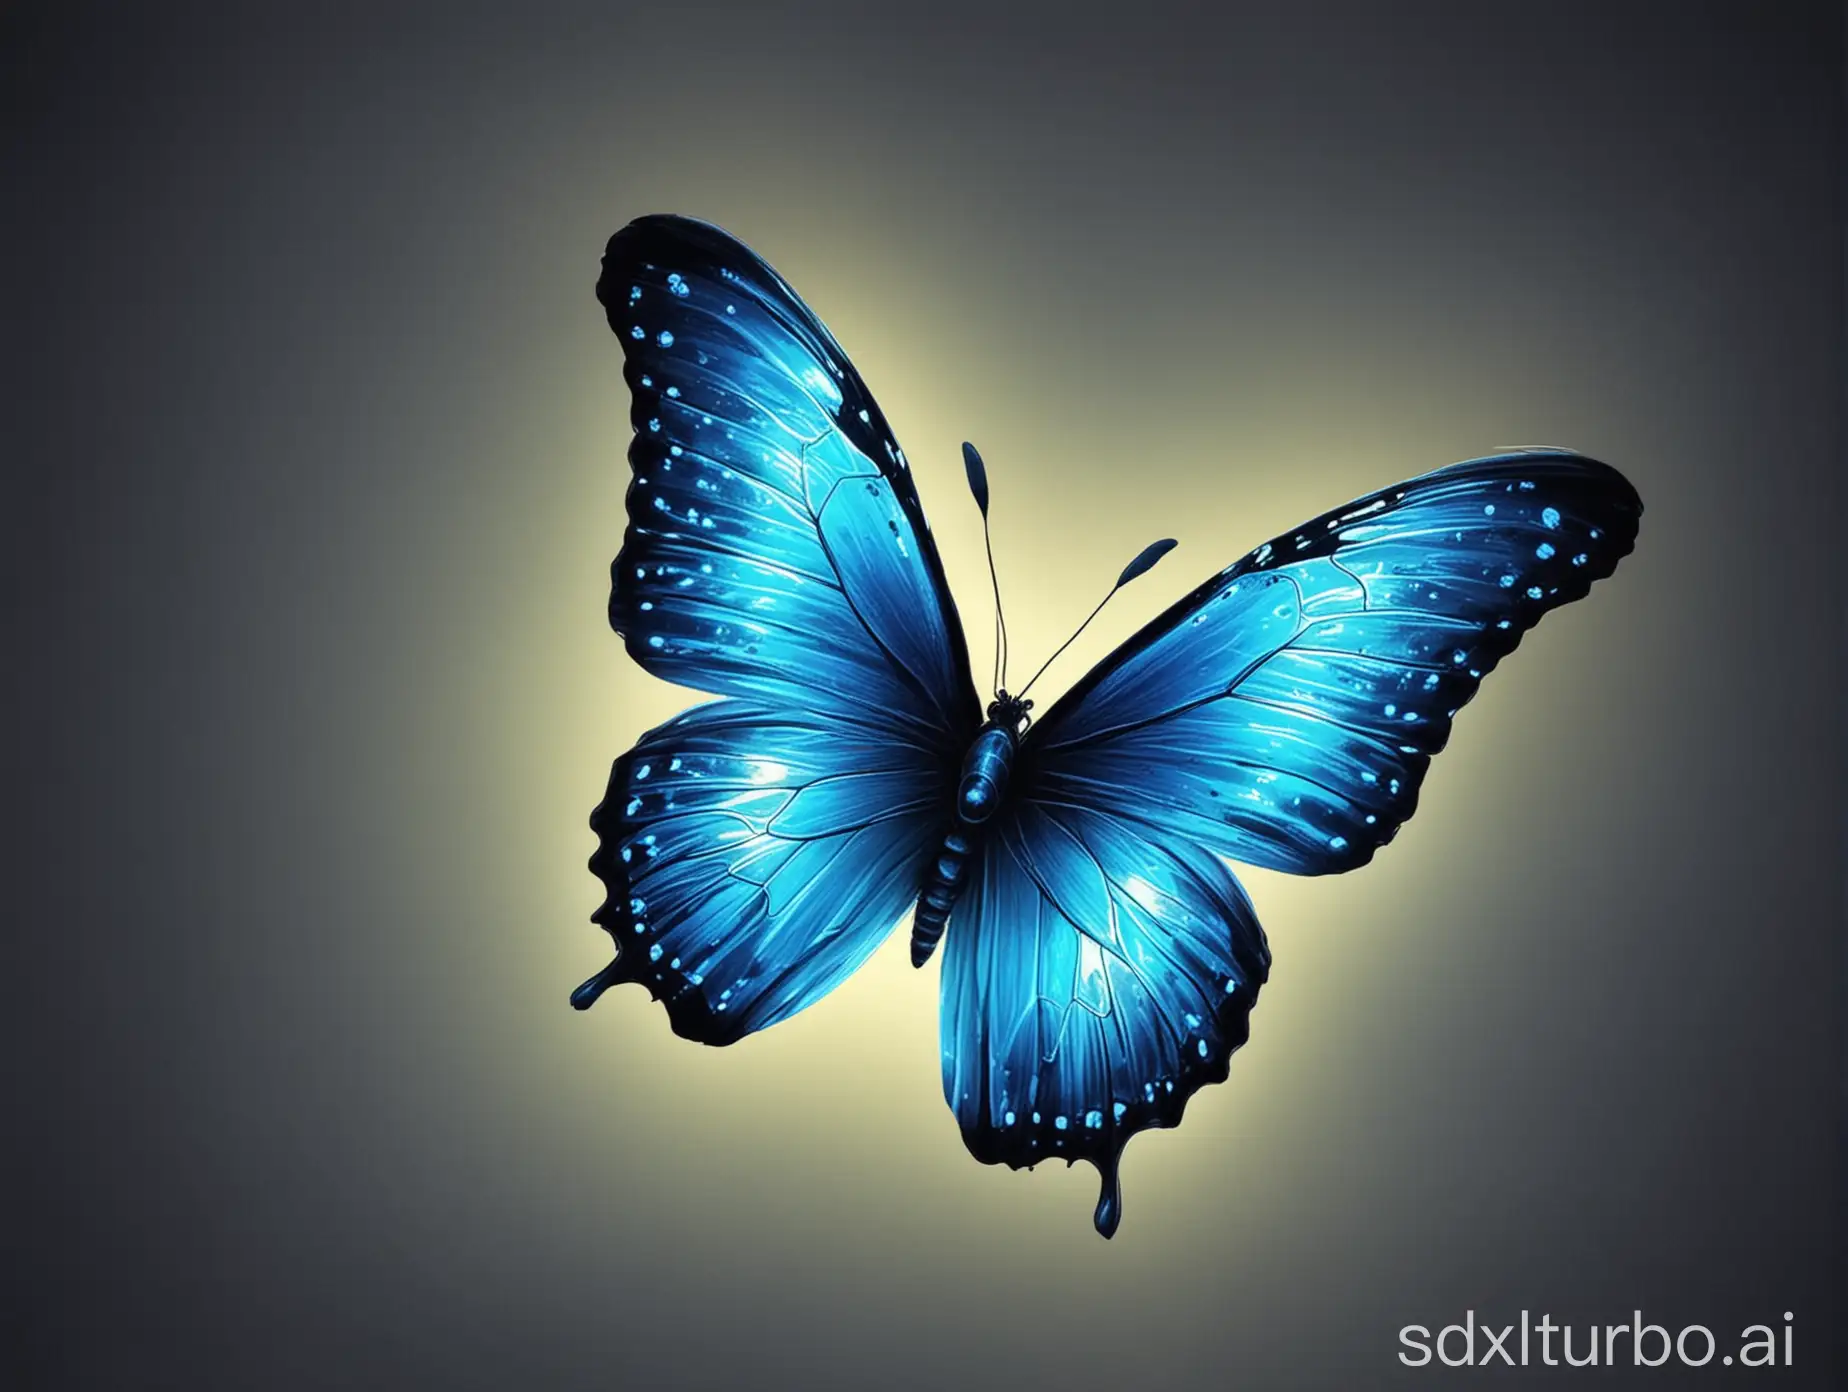 generate a  blue colour neon butterfly
flying